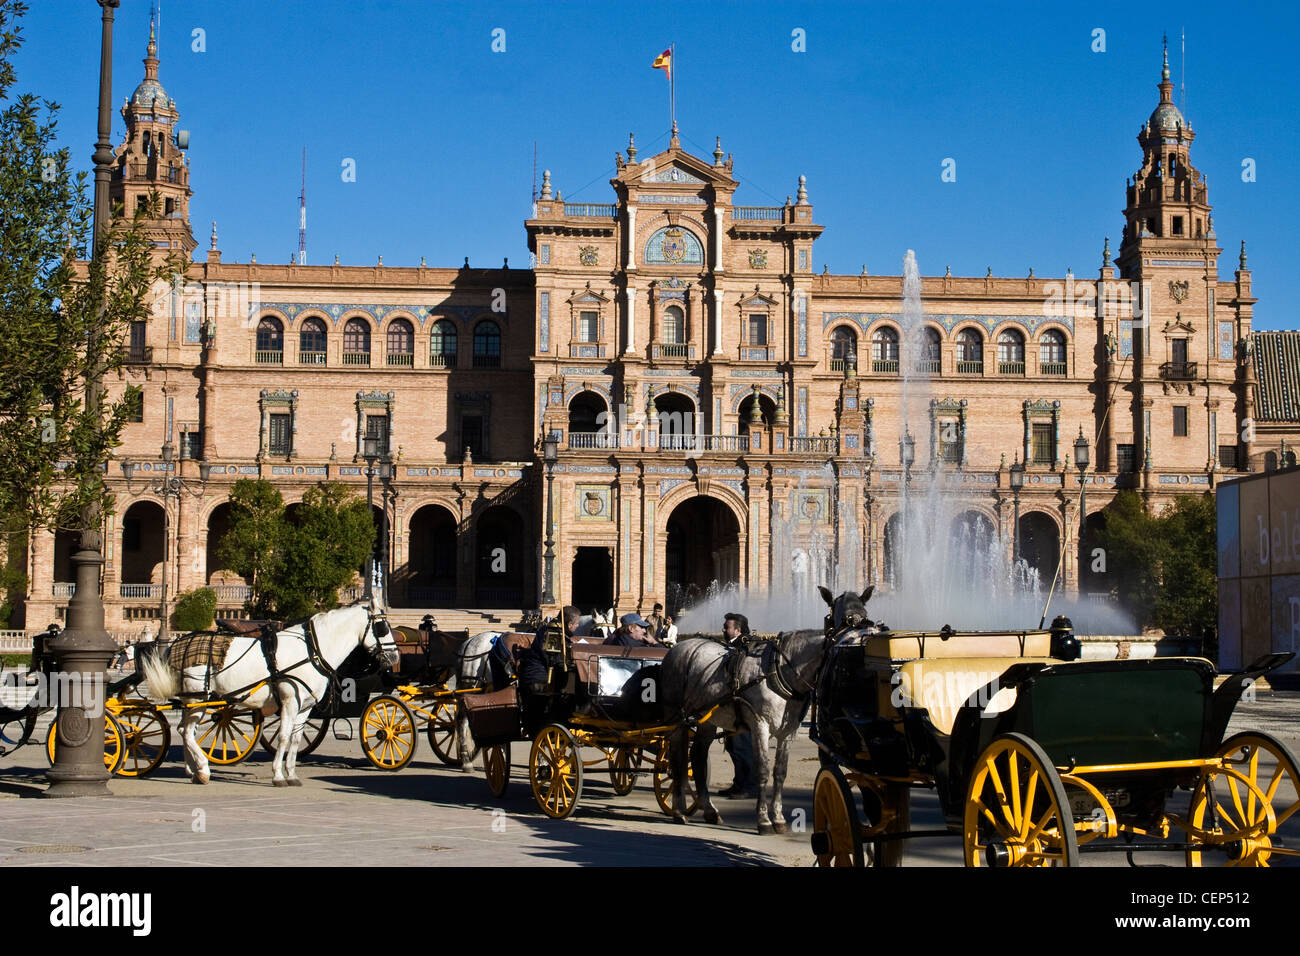 Spain, Seville, Plaza de Espana with horse drawn buggy rides, carriages Stock Photo